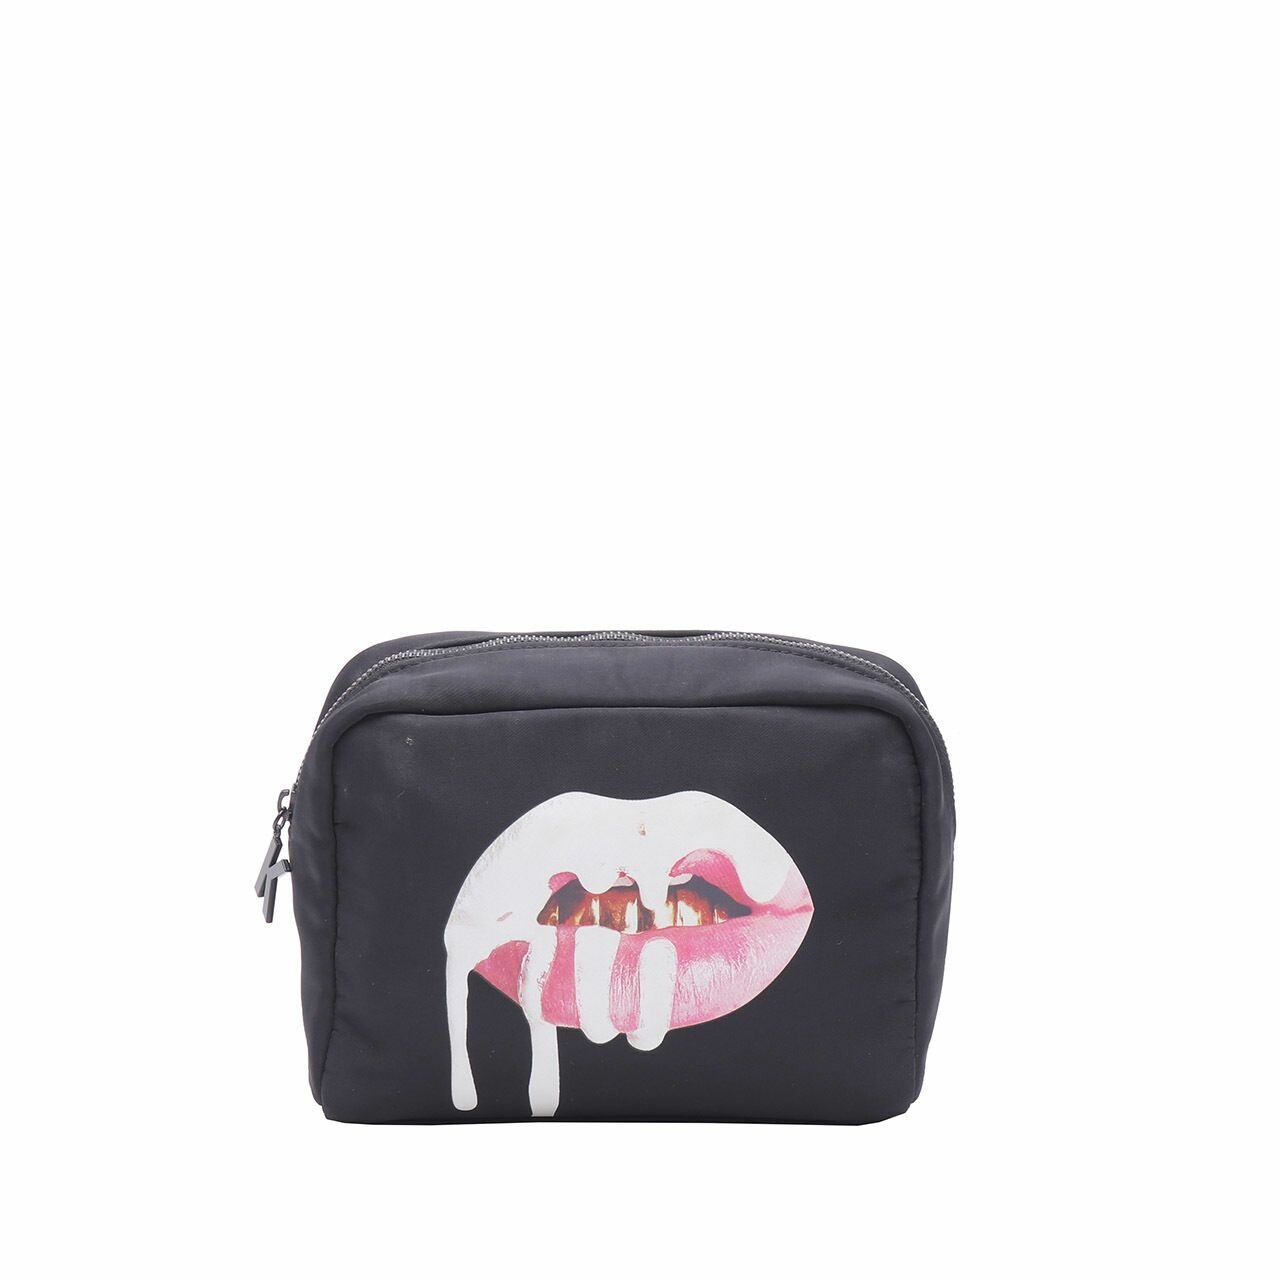 KYLIE by Kylie Jenner Black Pouch